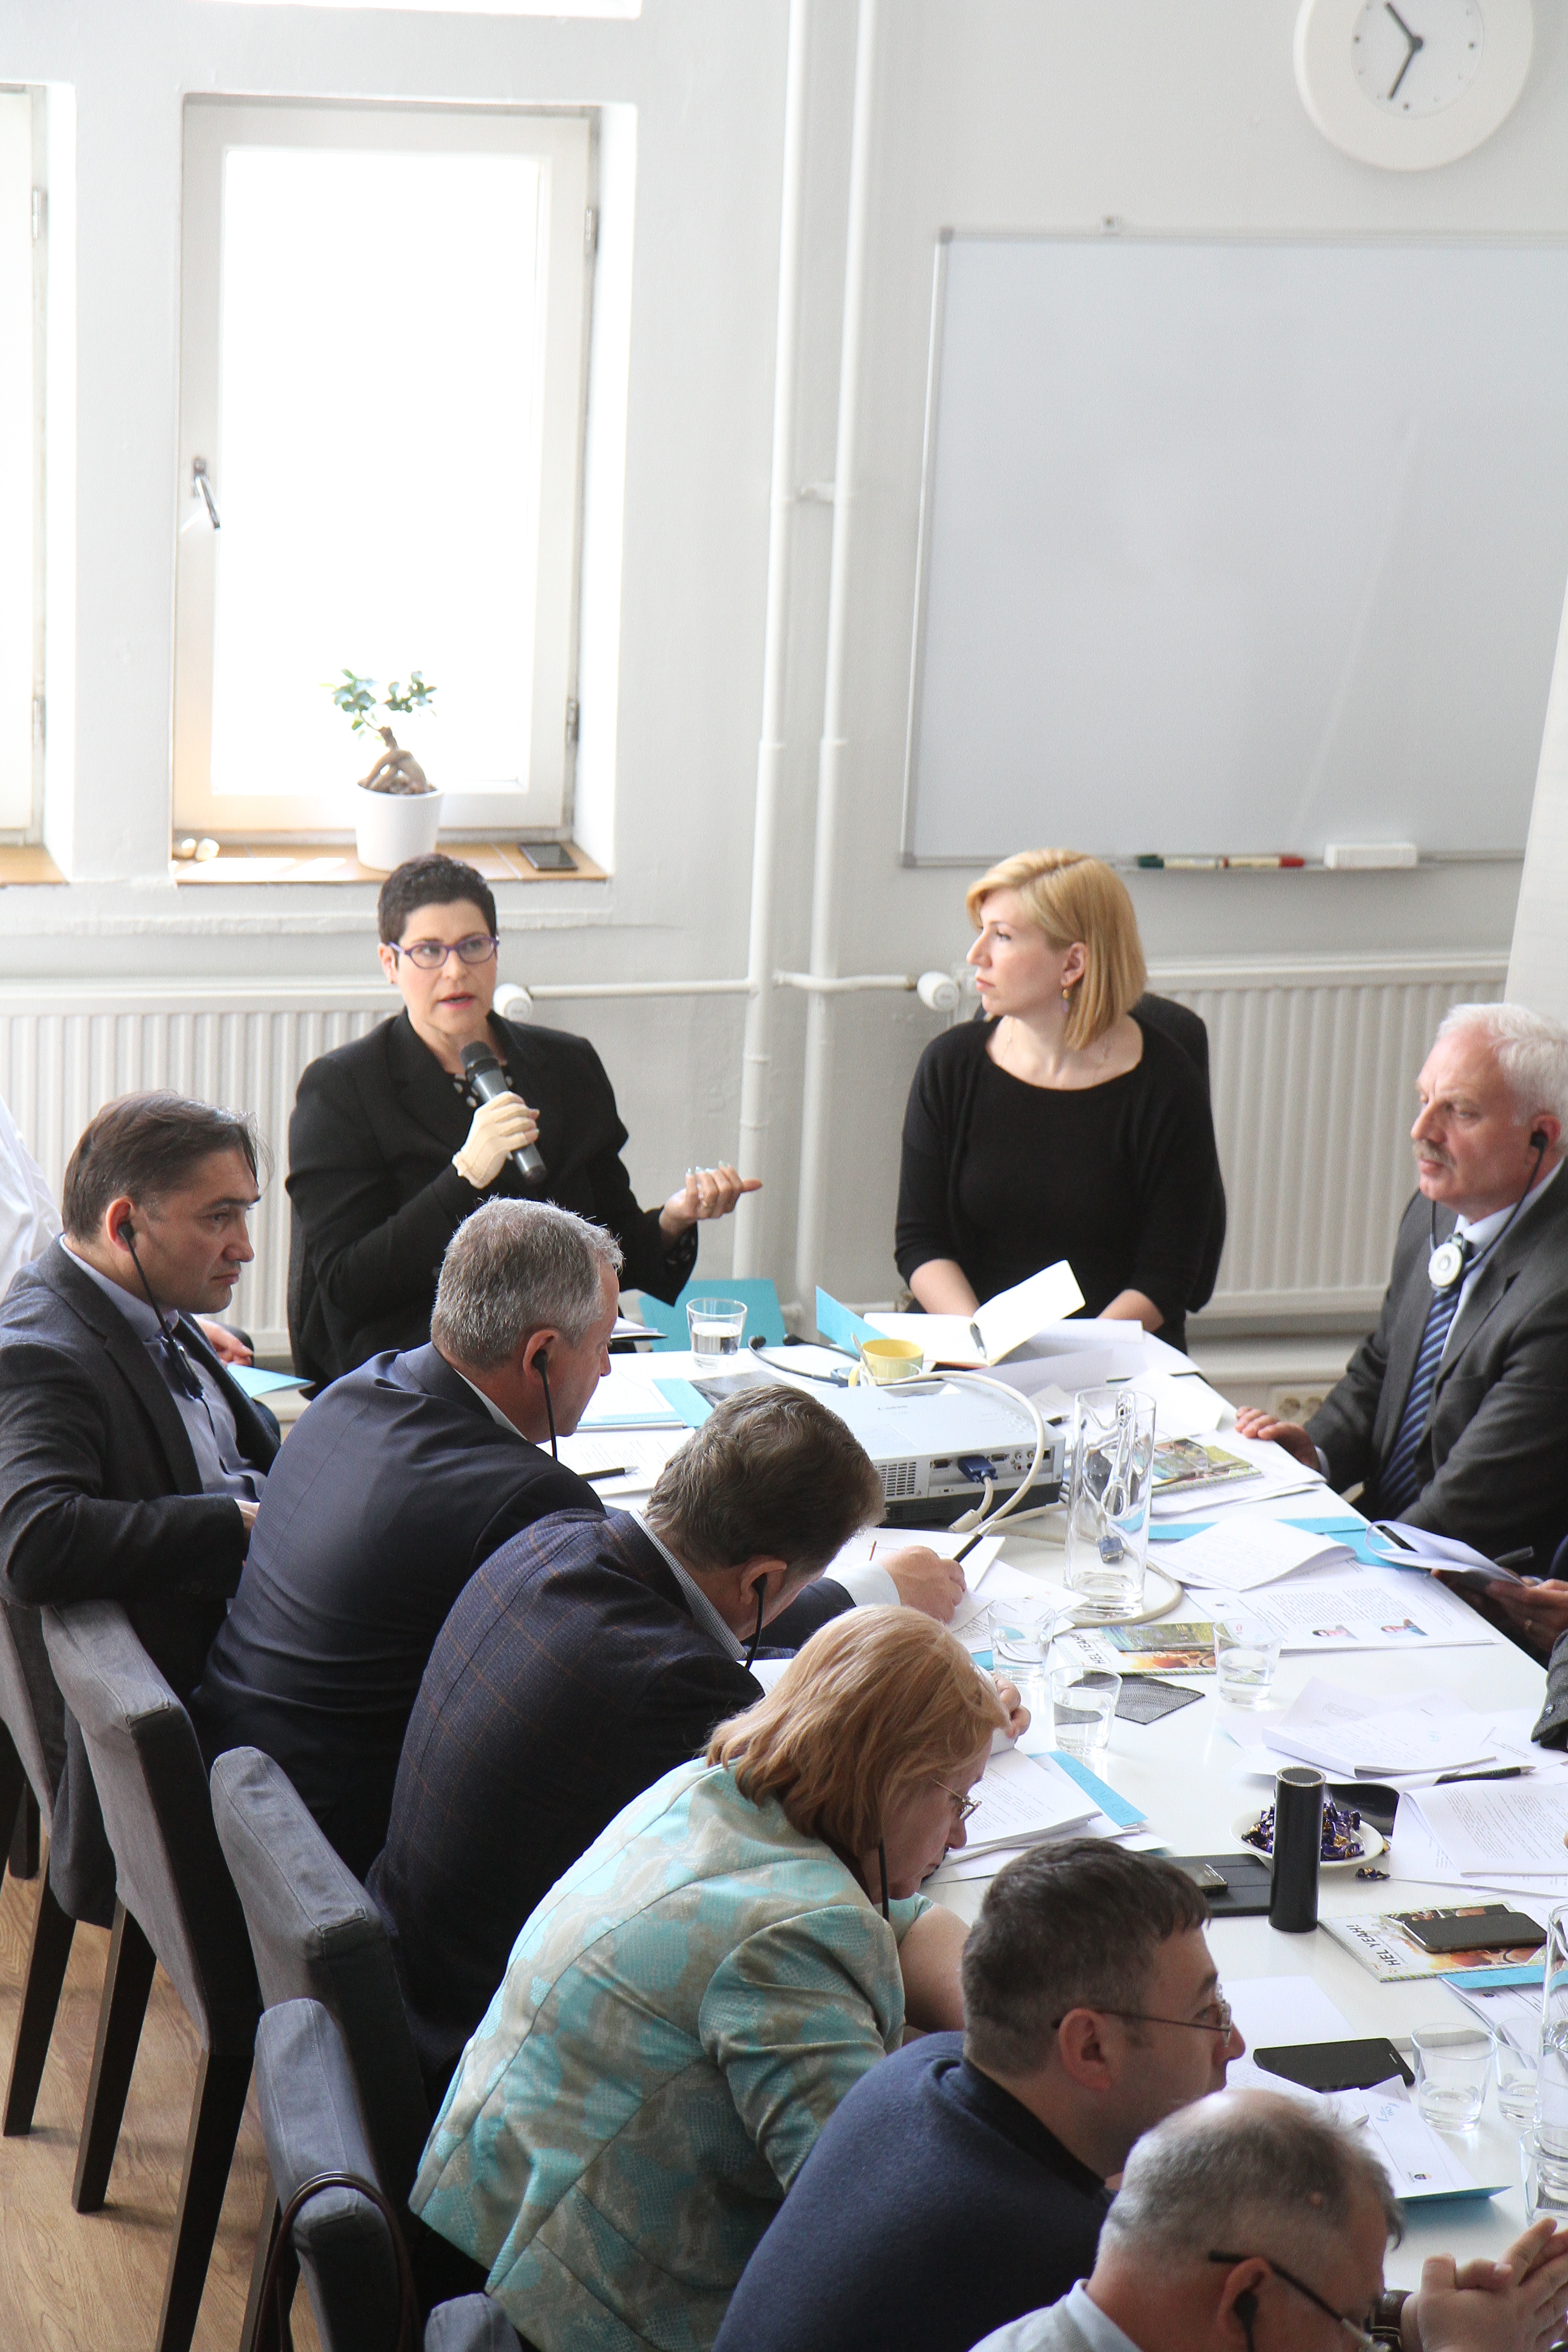 The group held also meetings at the CMI office in Helsinki. Executive Director Tuija Talvitie held a presentation about the Finnish education system.